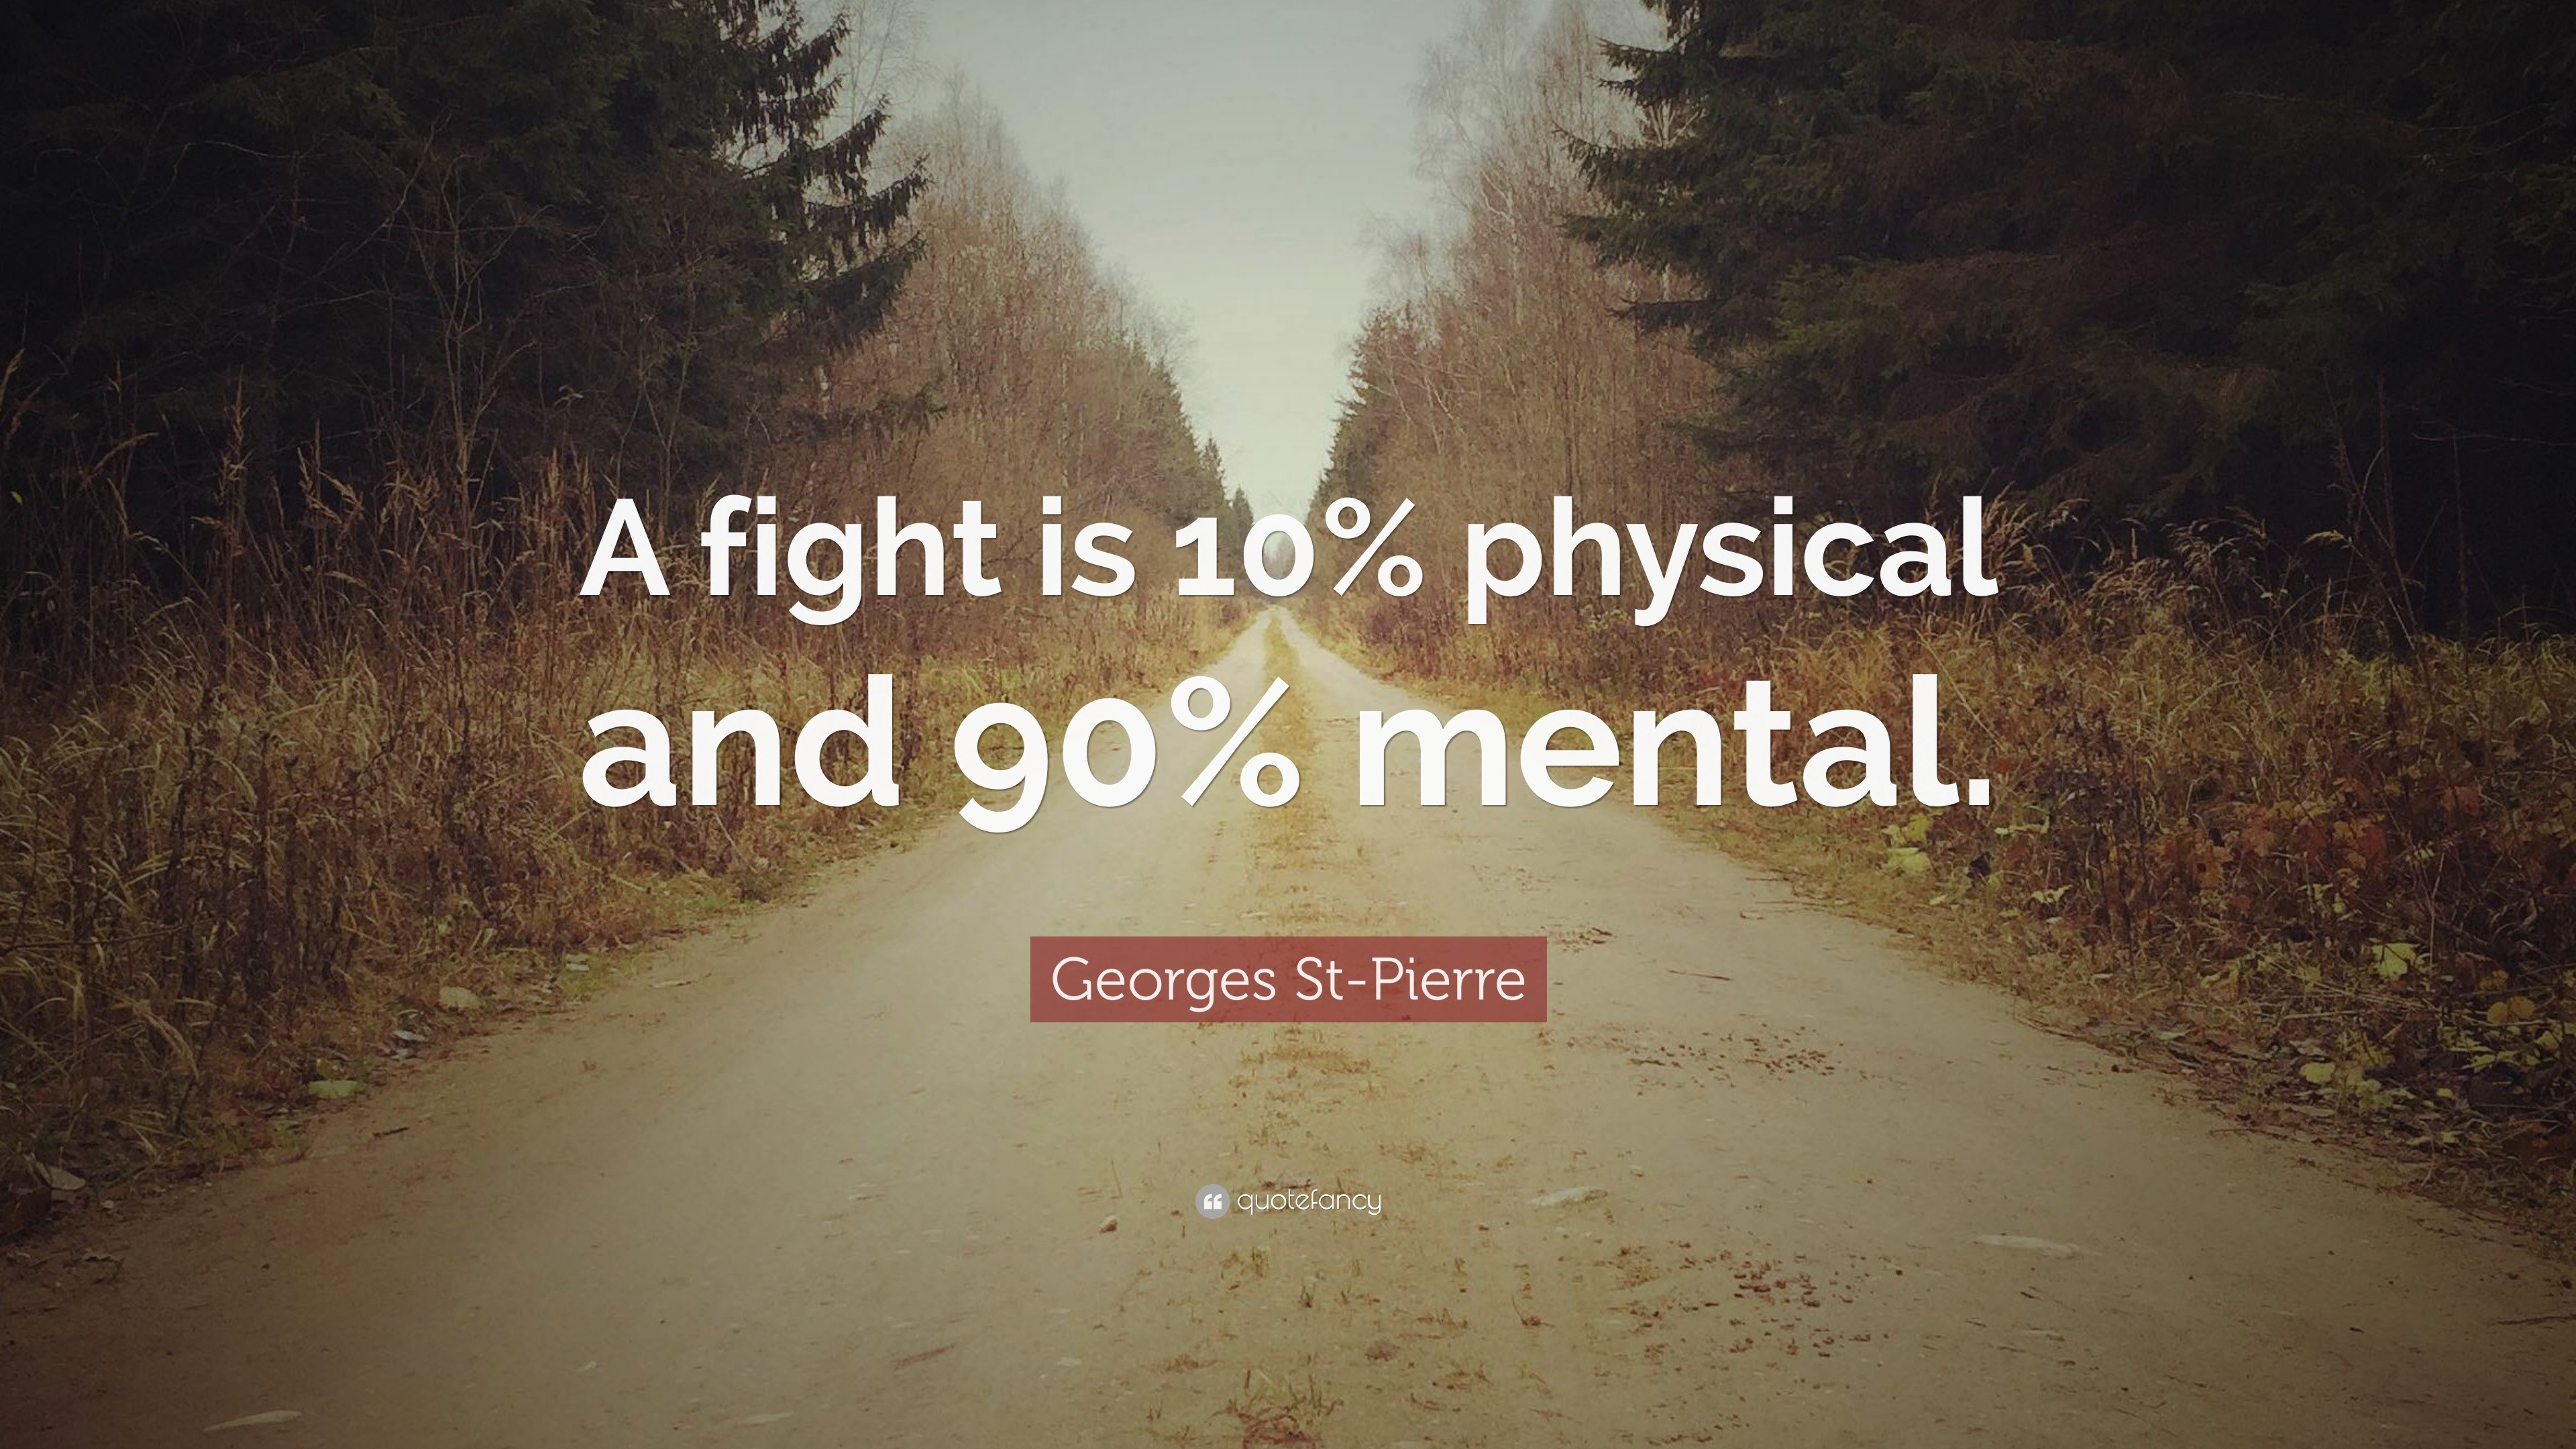 Georges St-Pierre Quote: “A fight is 10% physical and 90% mental.”